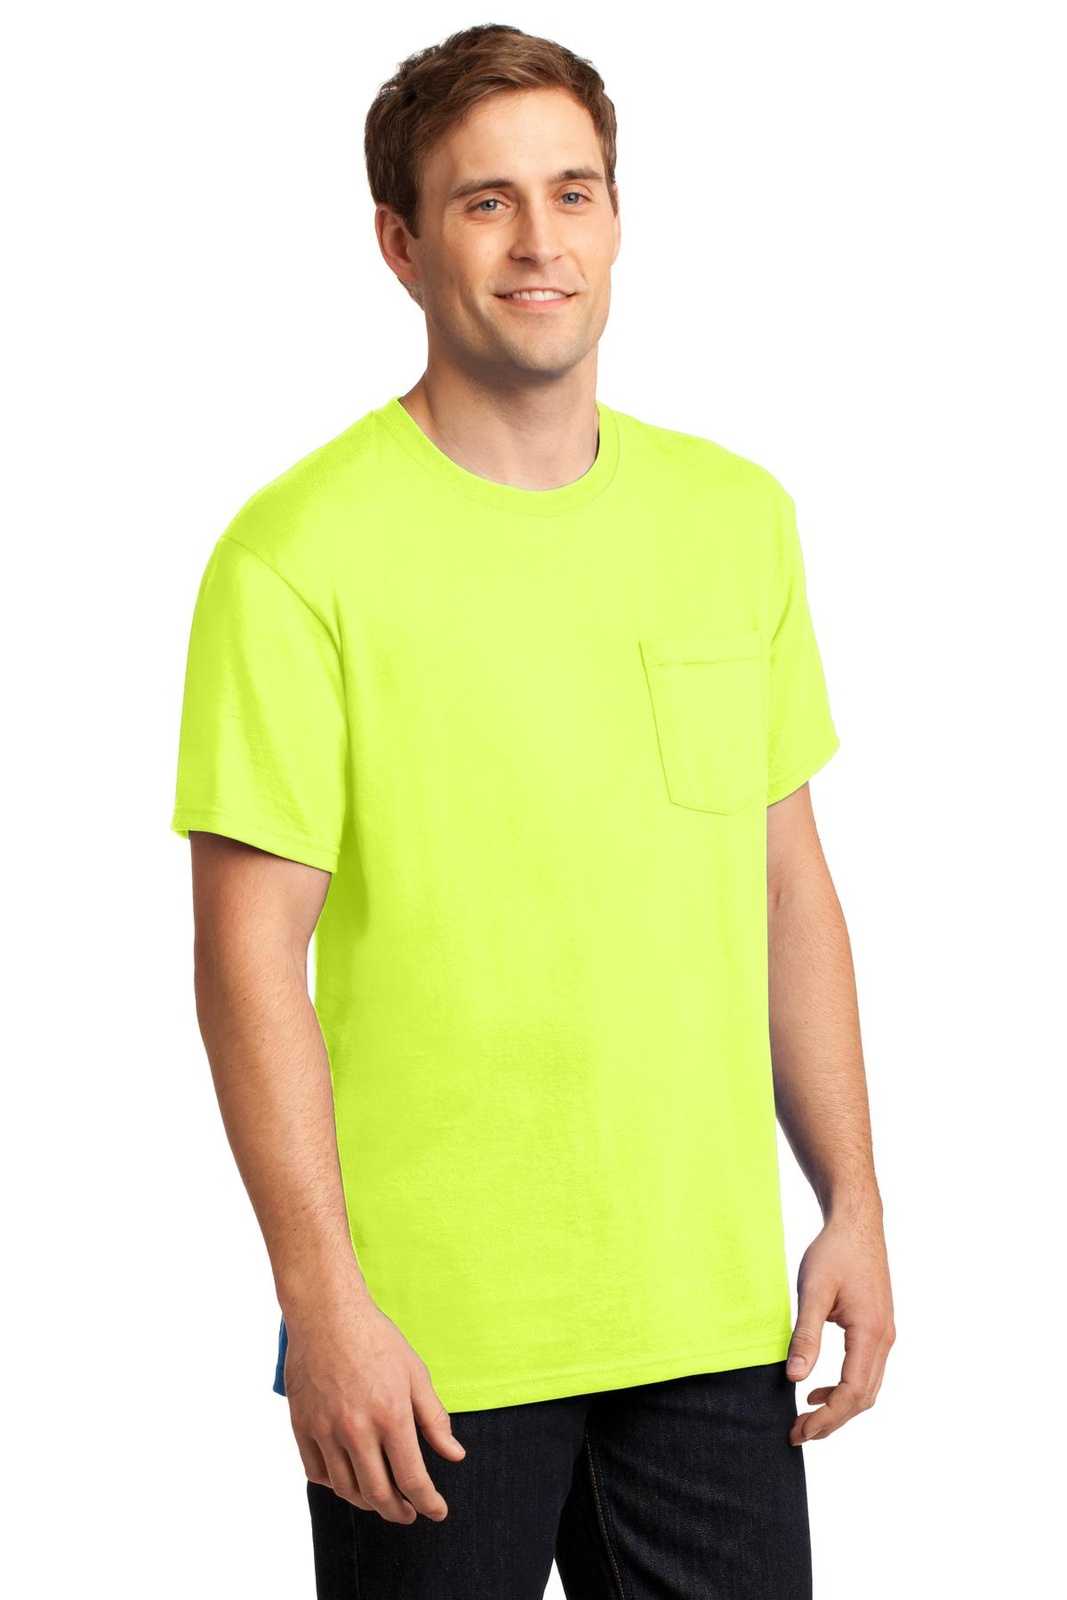 Jerzees 29MP Dri-Power 50/50 Cotton/Poly Pocket T-Shirt - Safety Green - HIT a Double